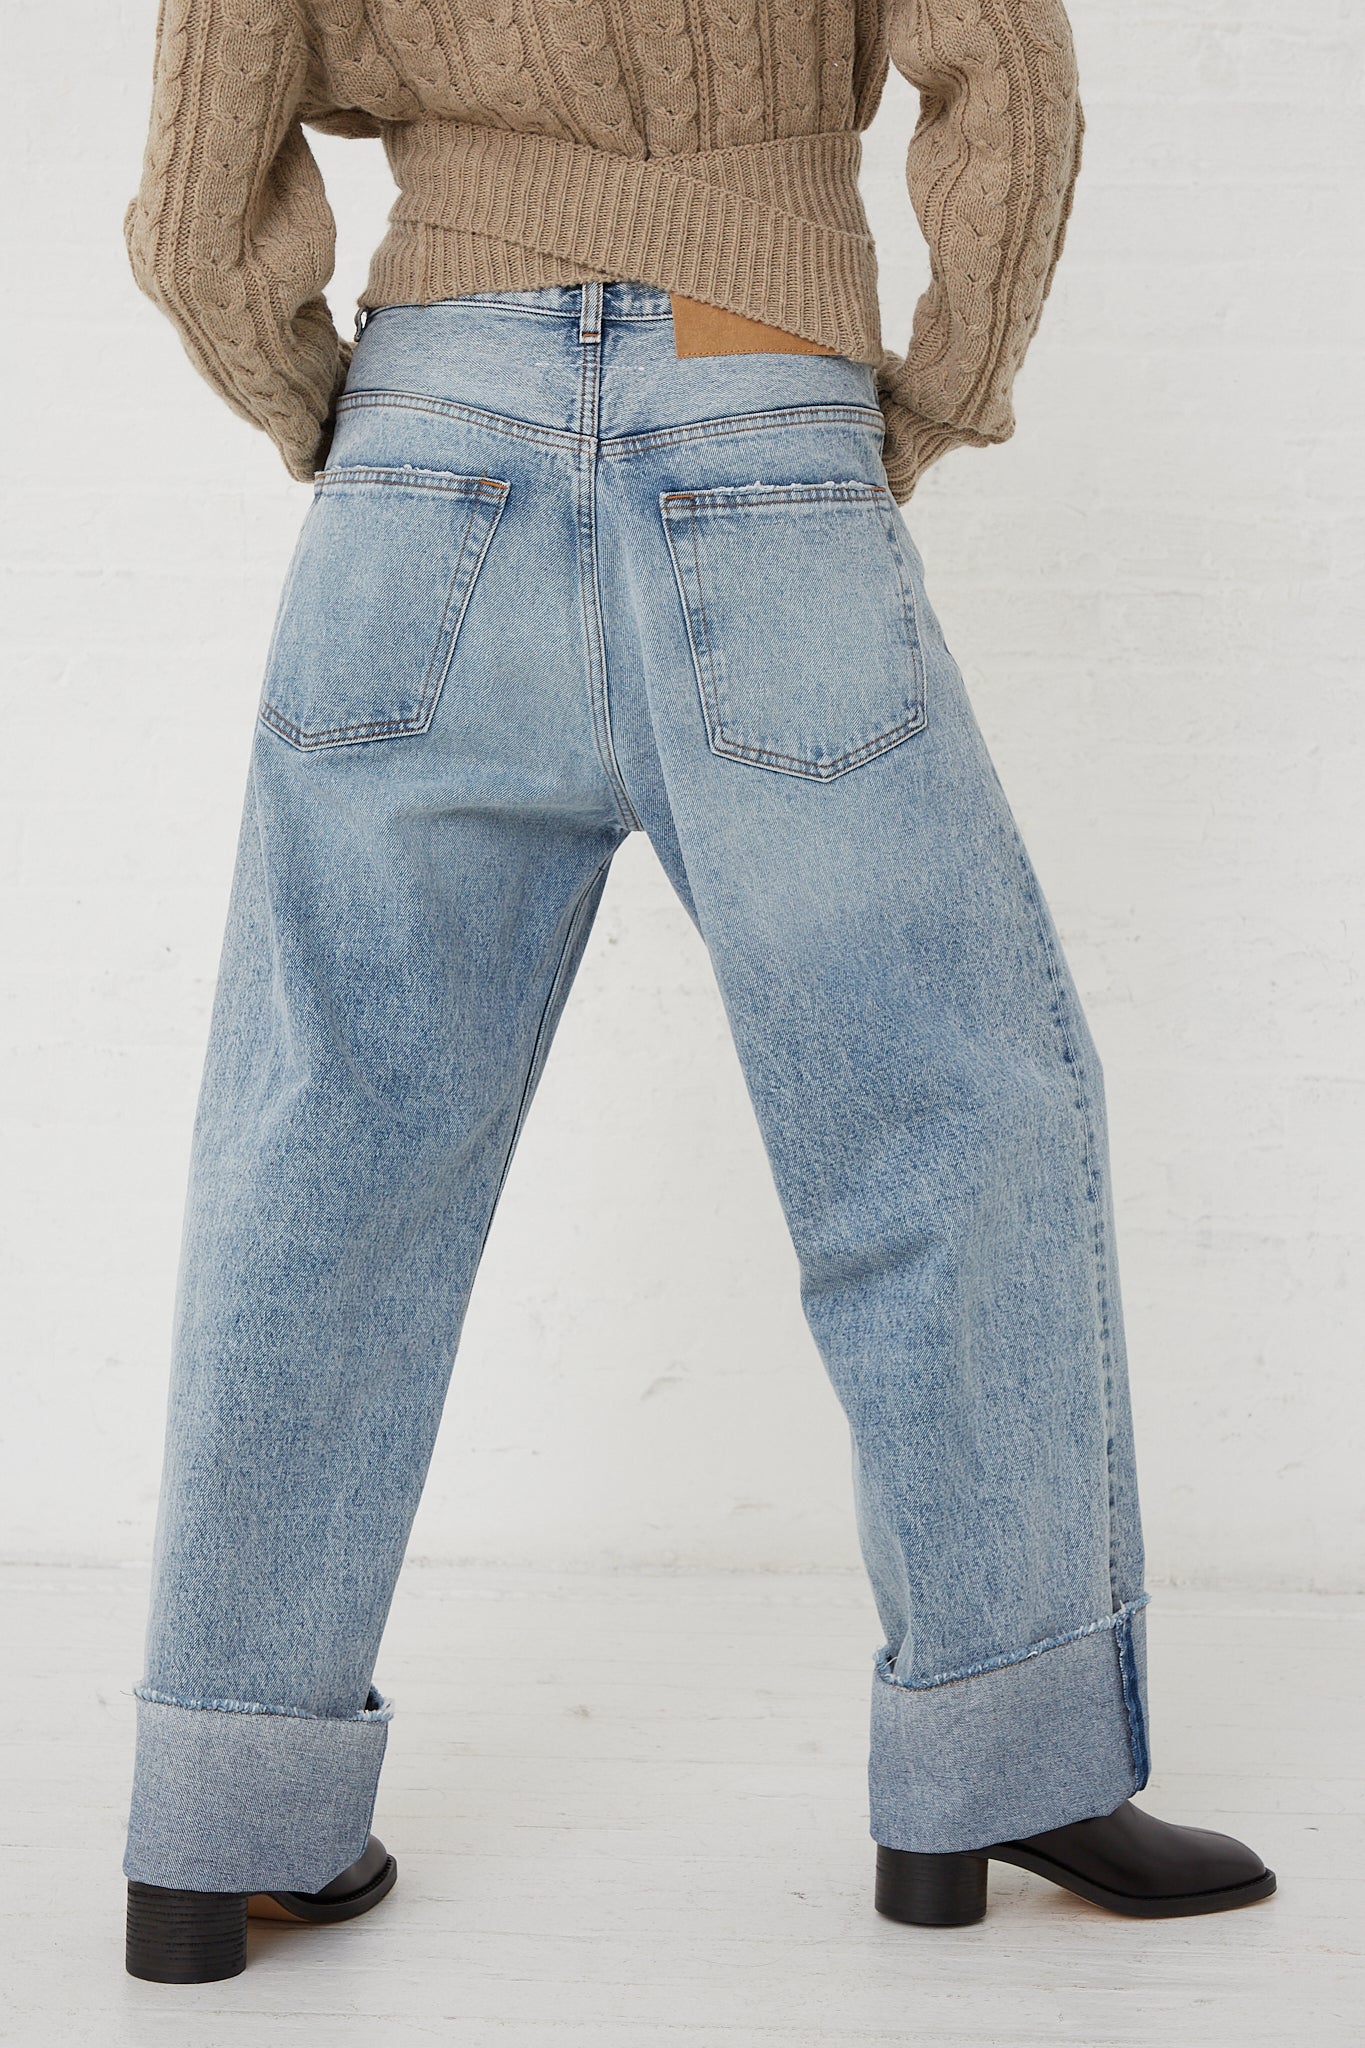 The back of a woman wearing MM6 high waisted jeans and a relaxed fit 5 Pocket Pant in Light Indigo sweater.